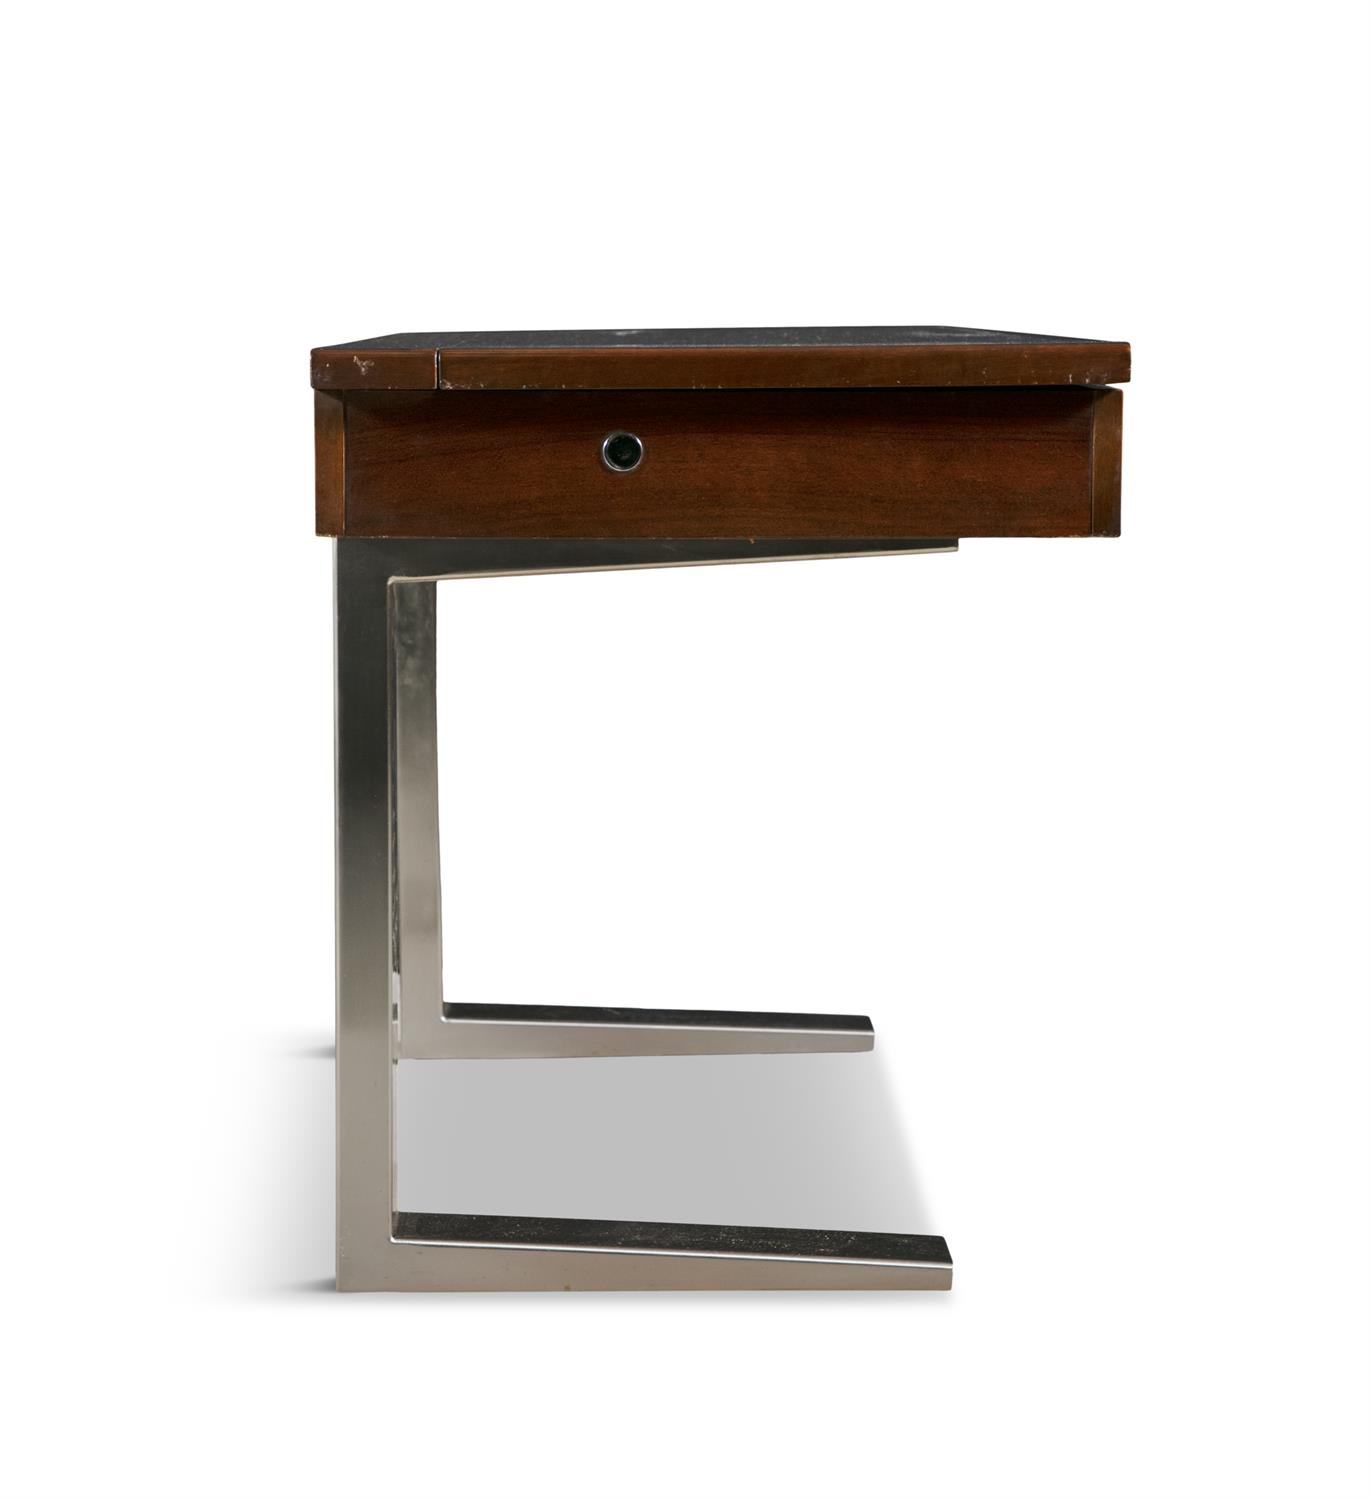 VANITY UNIT Walnut vanity unit, lift top, mirror interior with two chairs. Italy. - Image 9 of 9